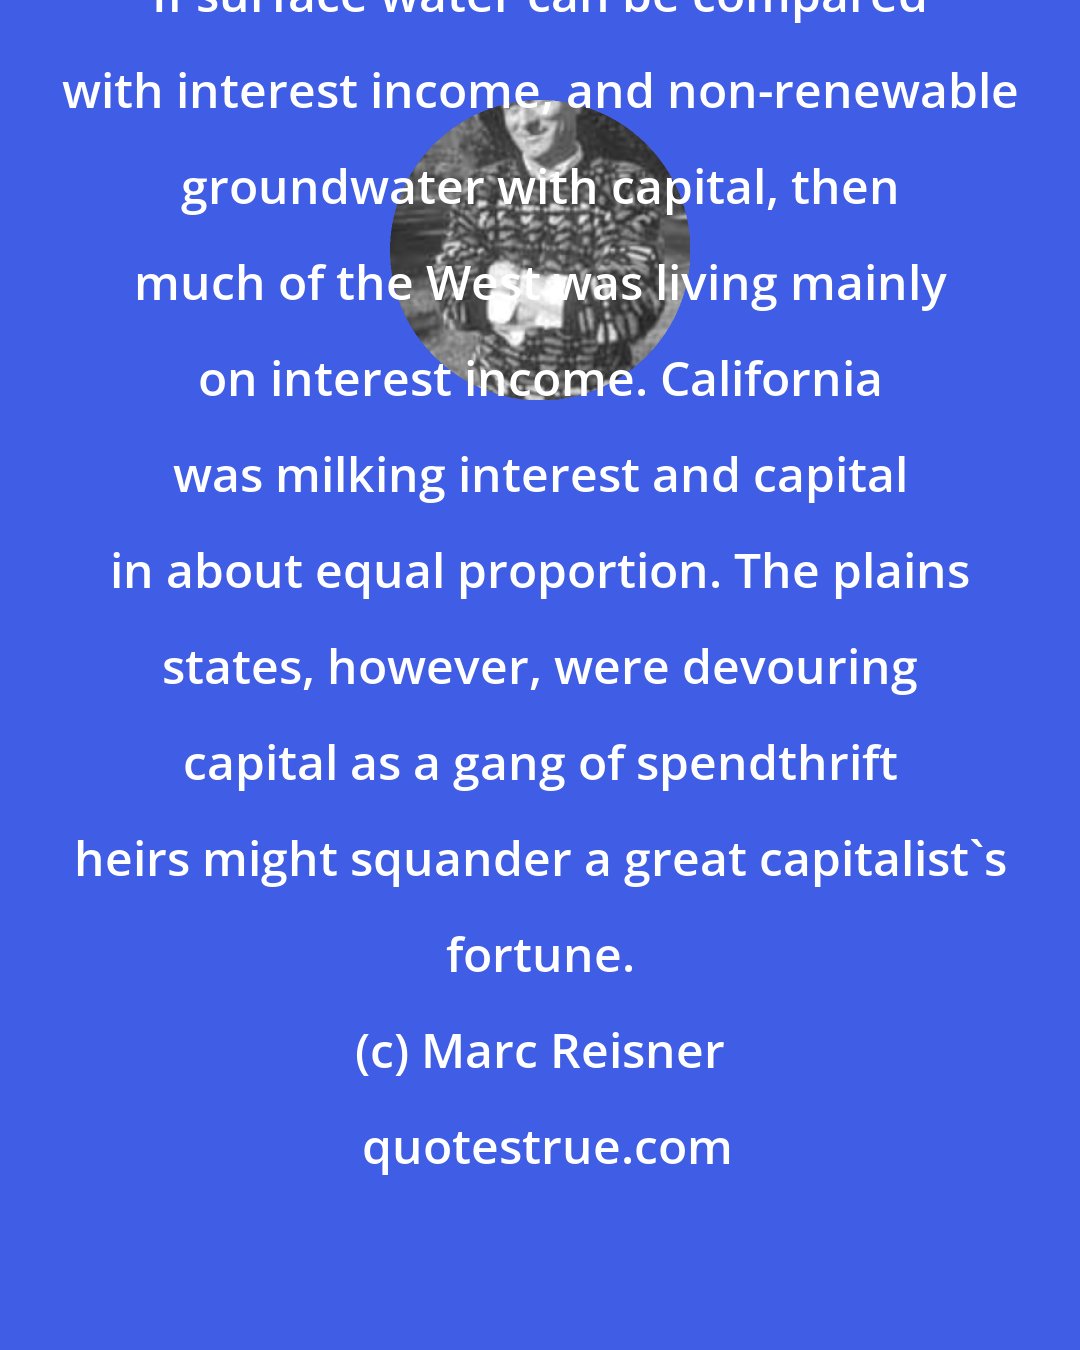 Marc Reisner: If surface water can be compared with interest income, and non-renewable groundwater with capital, then much of the West was living mainly on interest income. California was milking interest and capital in about equal proportion. The plains states, however, were devouring capital as a gang of spendthrift heirs might squander a great capitalist's fortune.